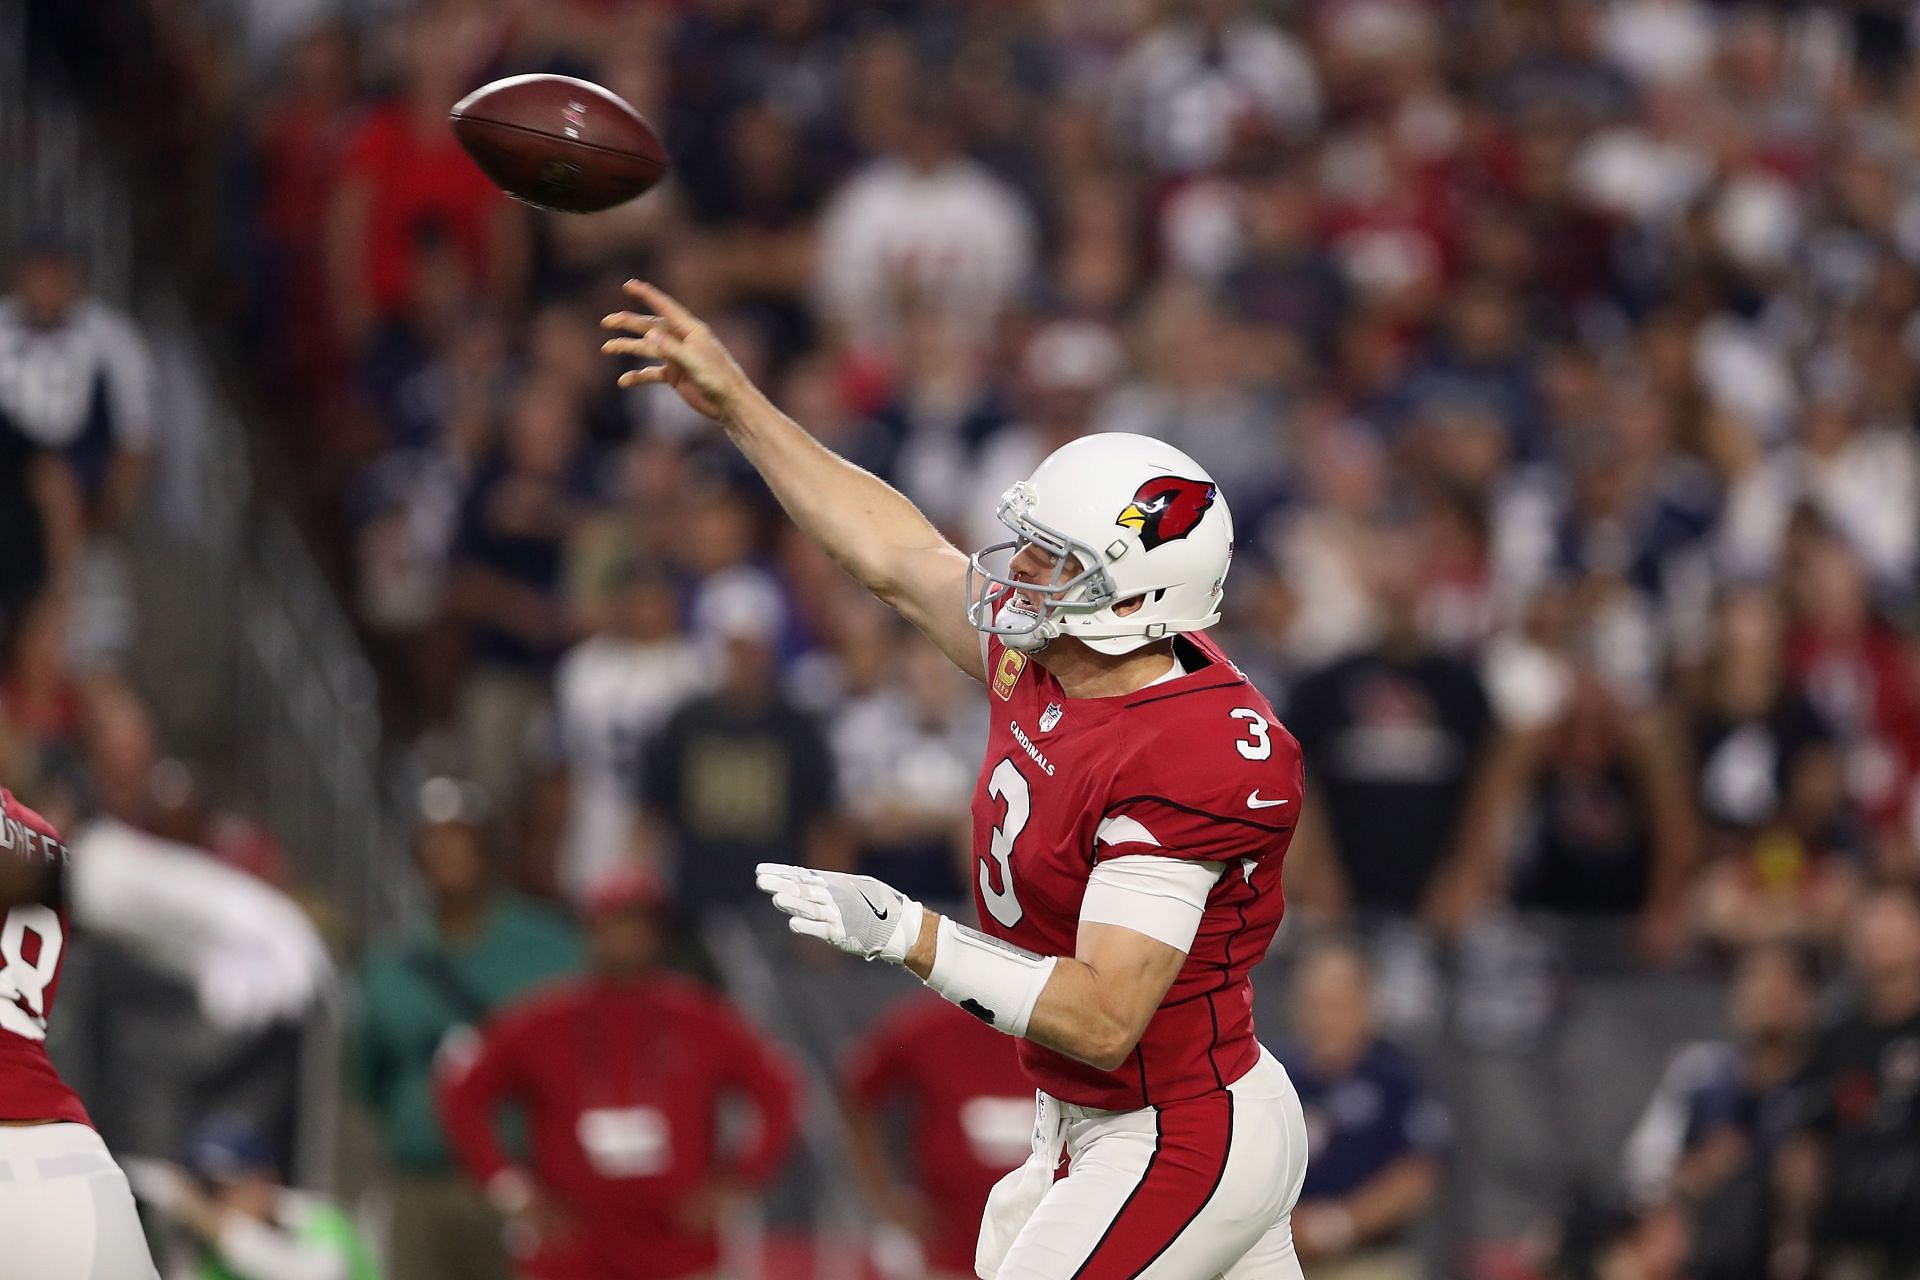 Carson Palmer had a fine third act in the NFL